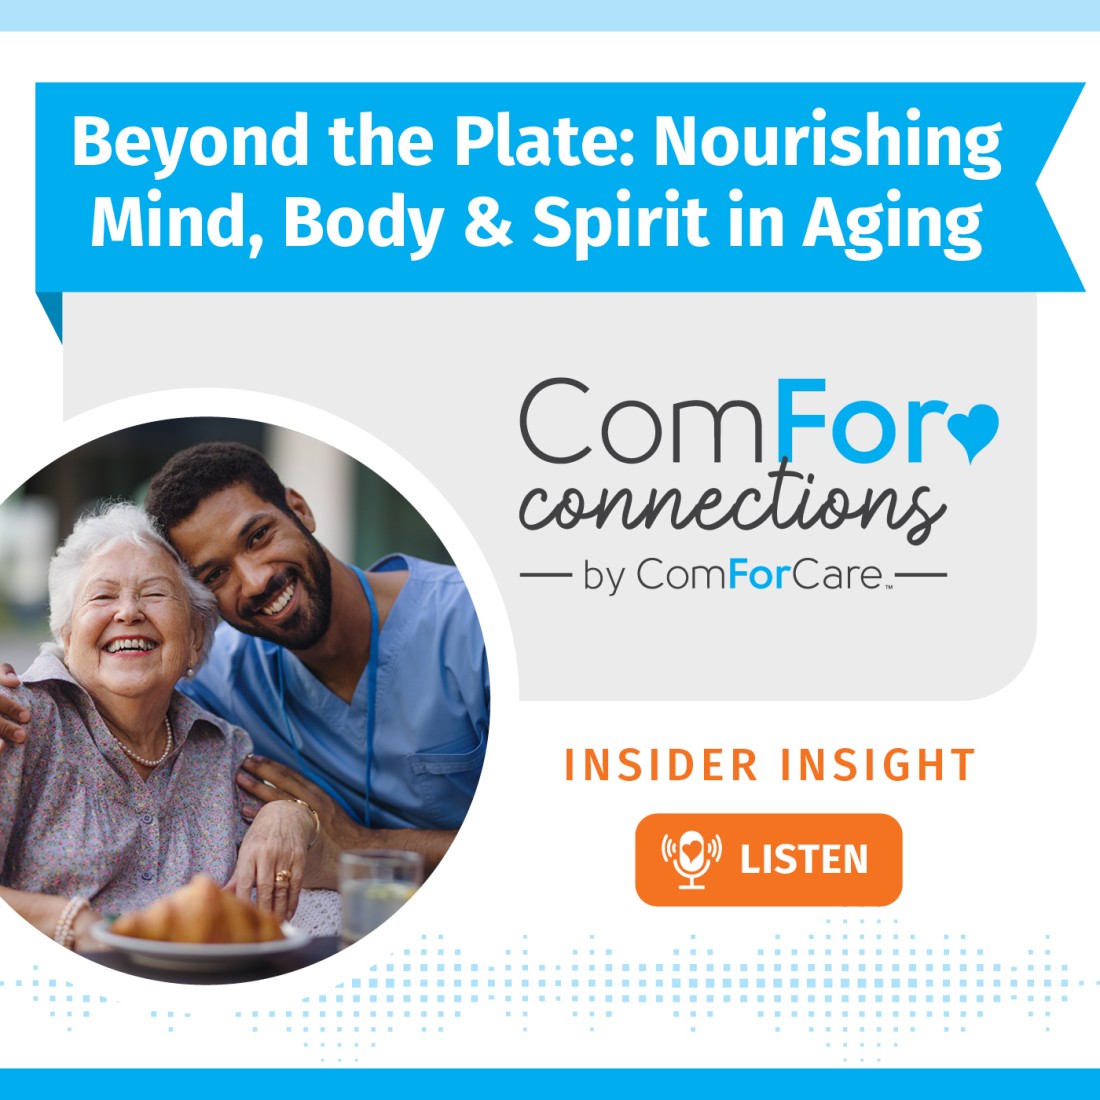 Home Care Podcast | Home Care Resources | ComForCare - Social_Media_Graphic__Beyond_the_Plate_Nourishing_Mind%2C_Body_%26_Spirit_in_Aging